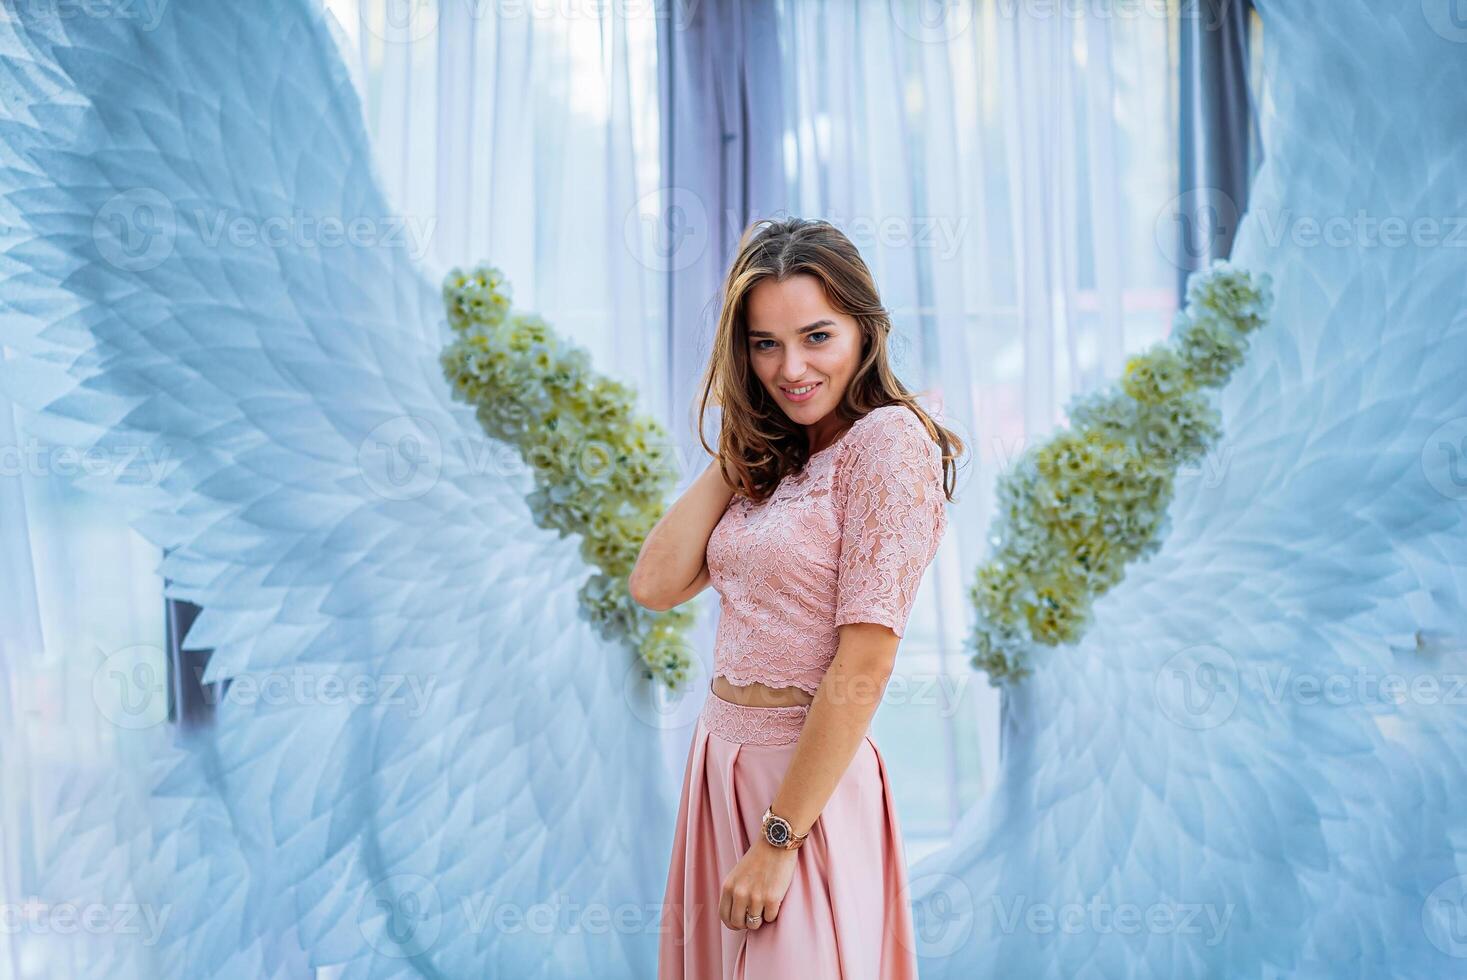 A Woman Standing in Front of an Angel Wings Backdrop photo